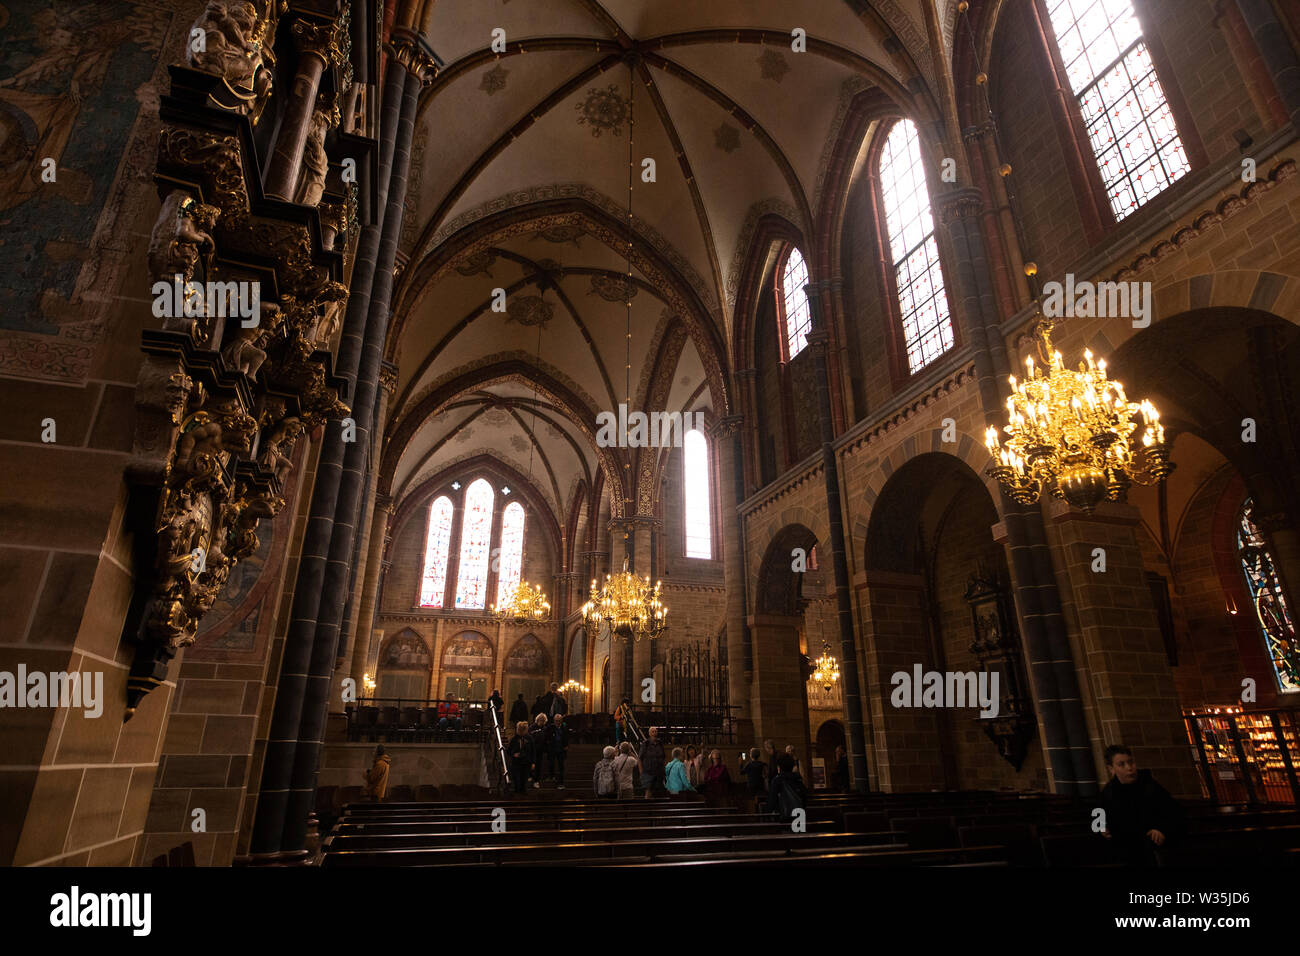 Inside St Peter's Cathedral (St Petri Dom) in Bremen, Germany. Stock Photo